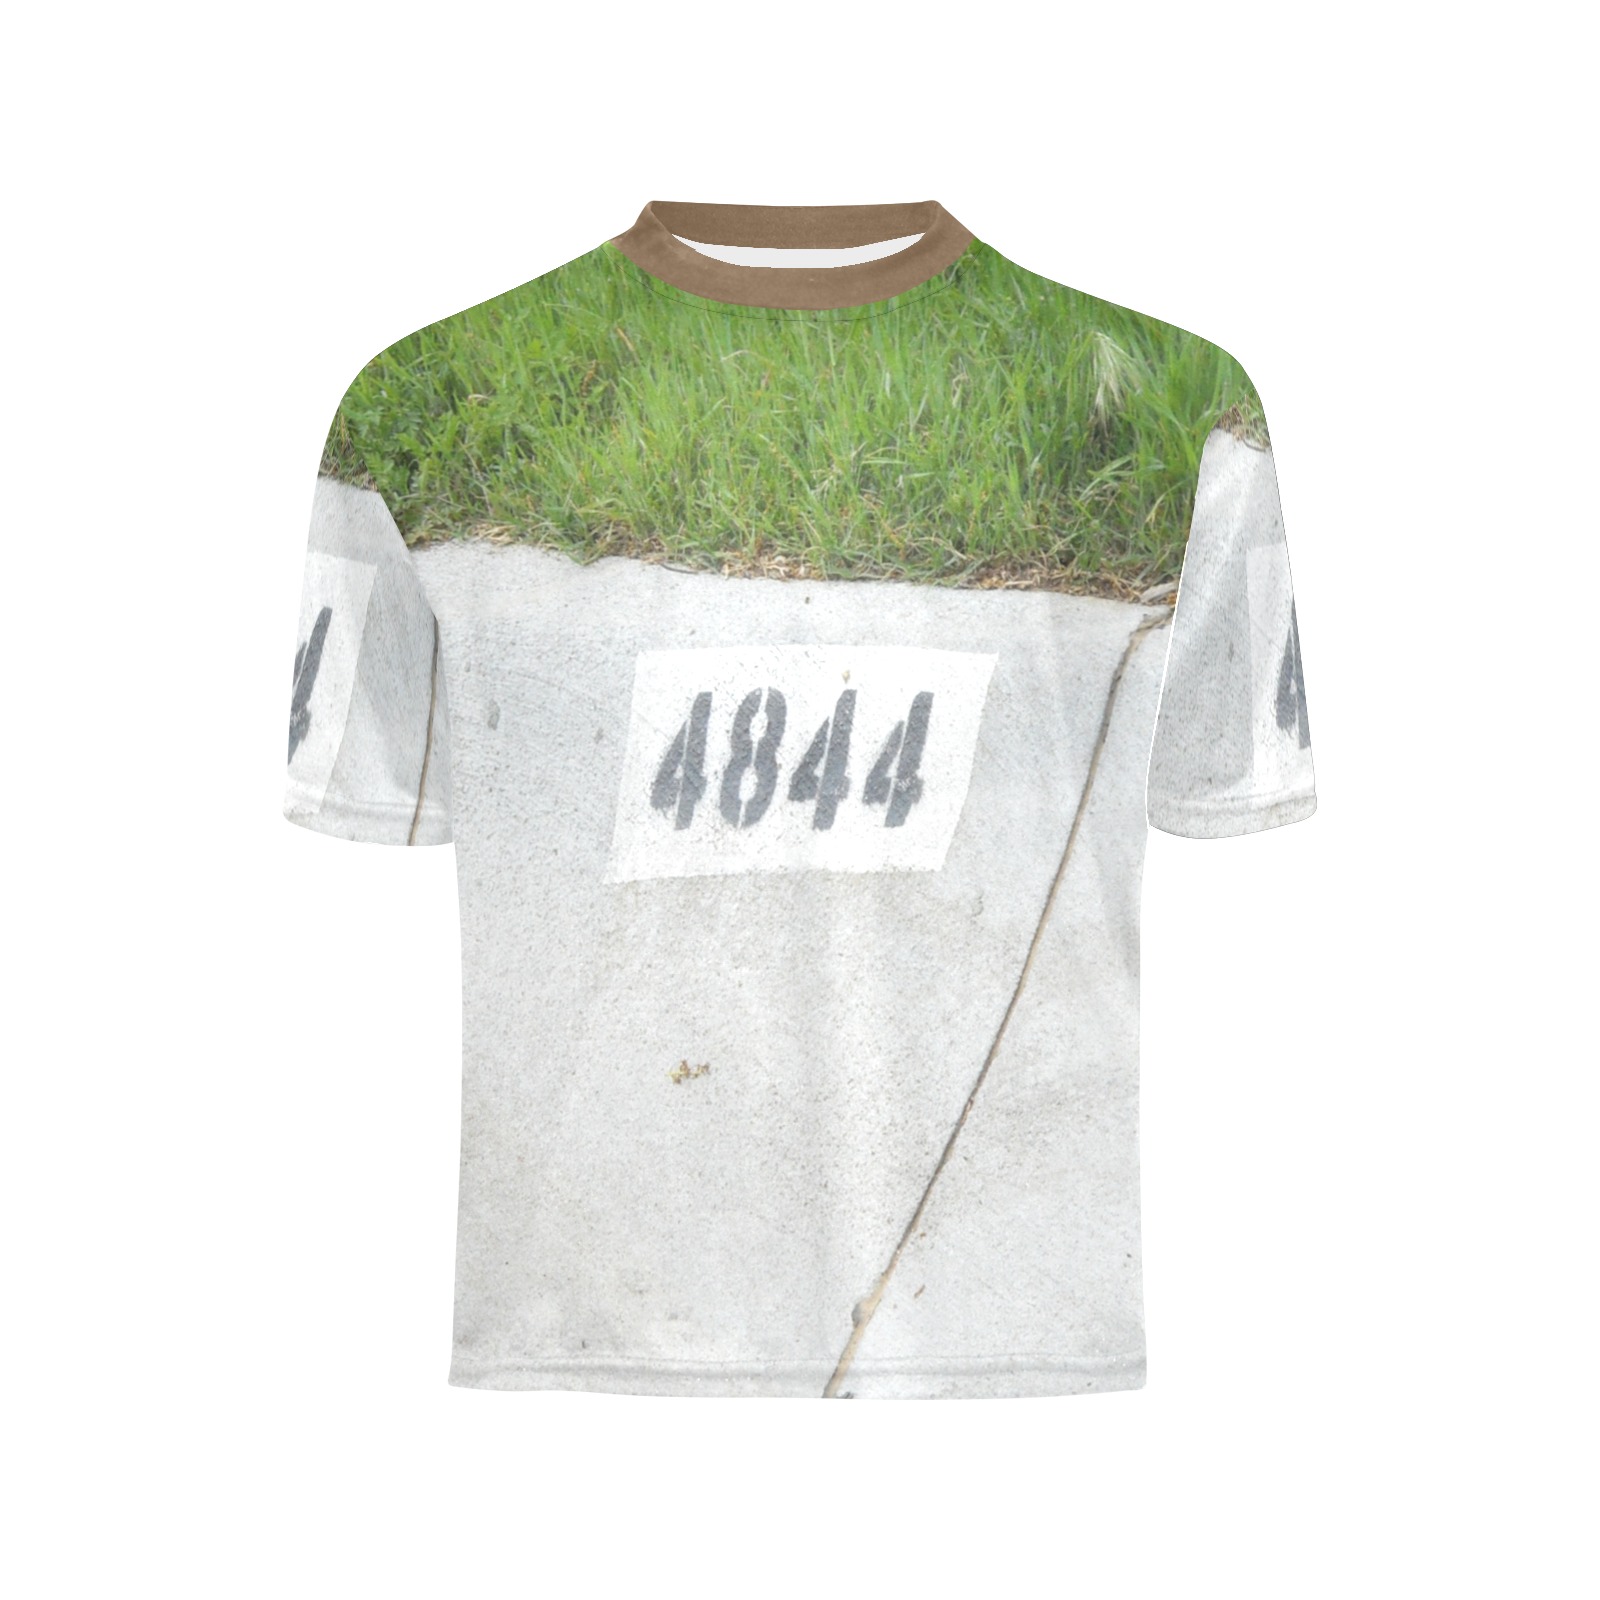 Street Number 4844 with brown collar Little Boys' All Over Print Crew Neck T-Shirt (Model T40-2)